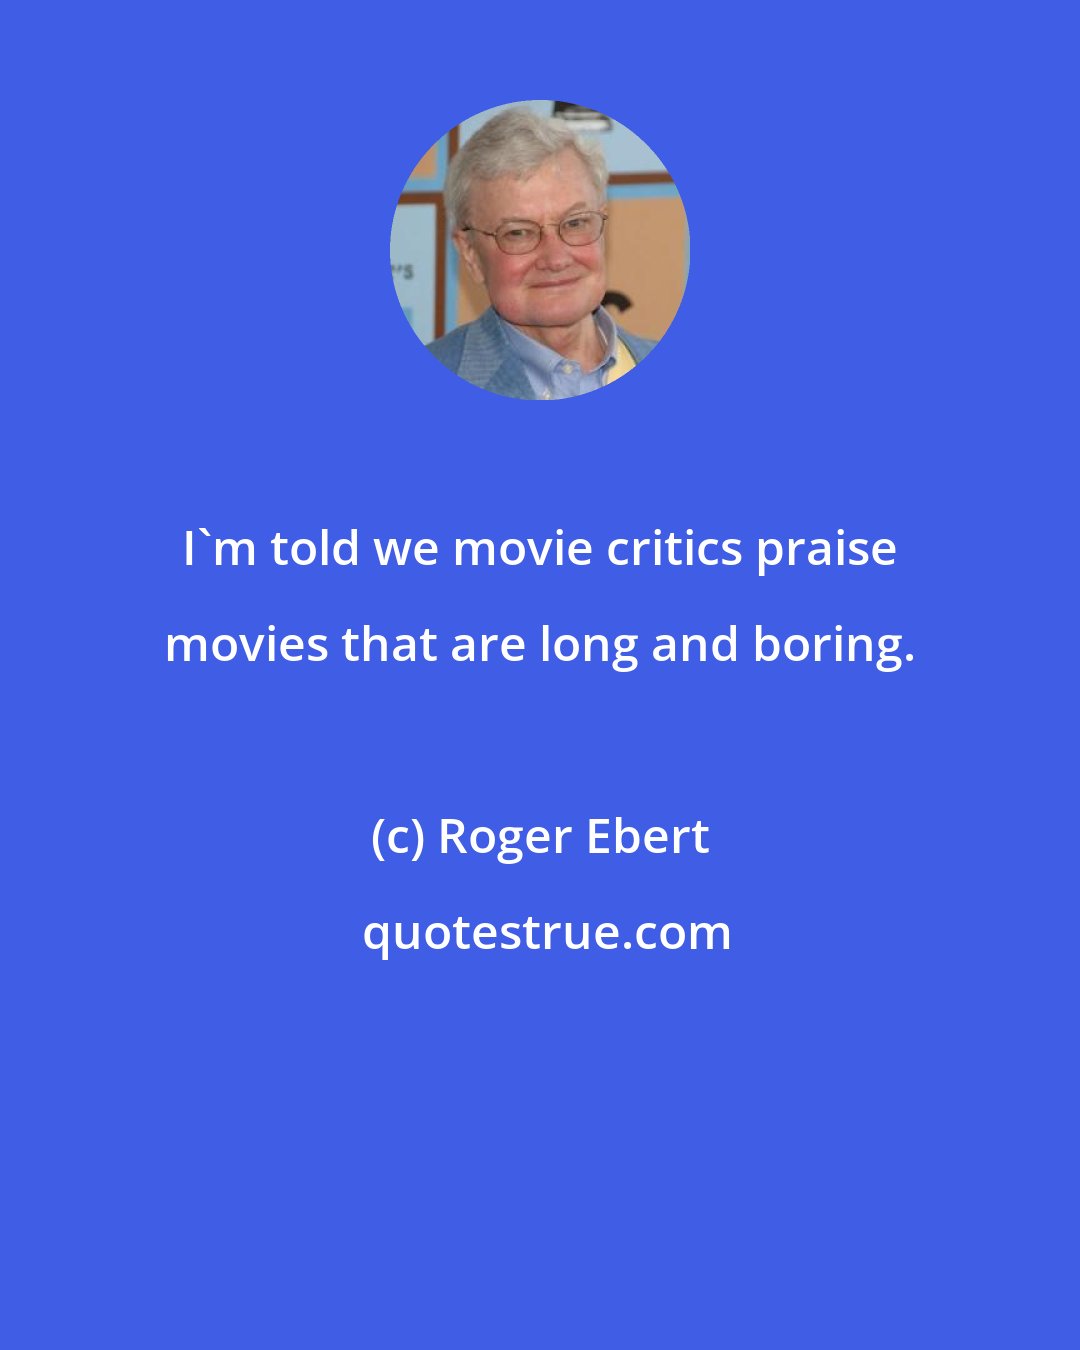 Roger Ebert: I'm told we movie critics praise movies that are long and boring.